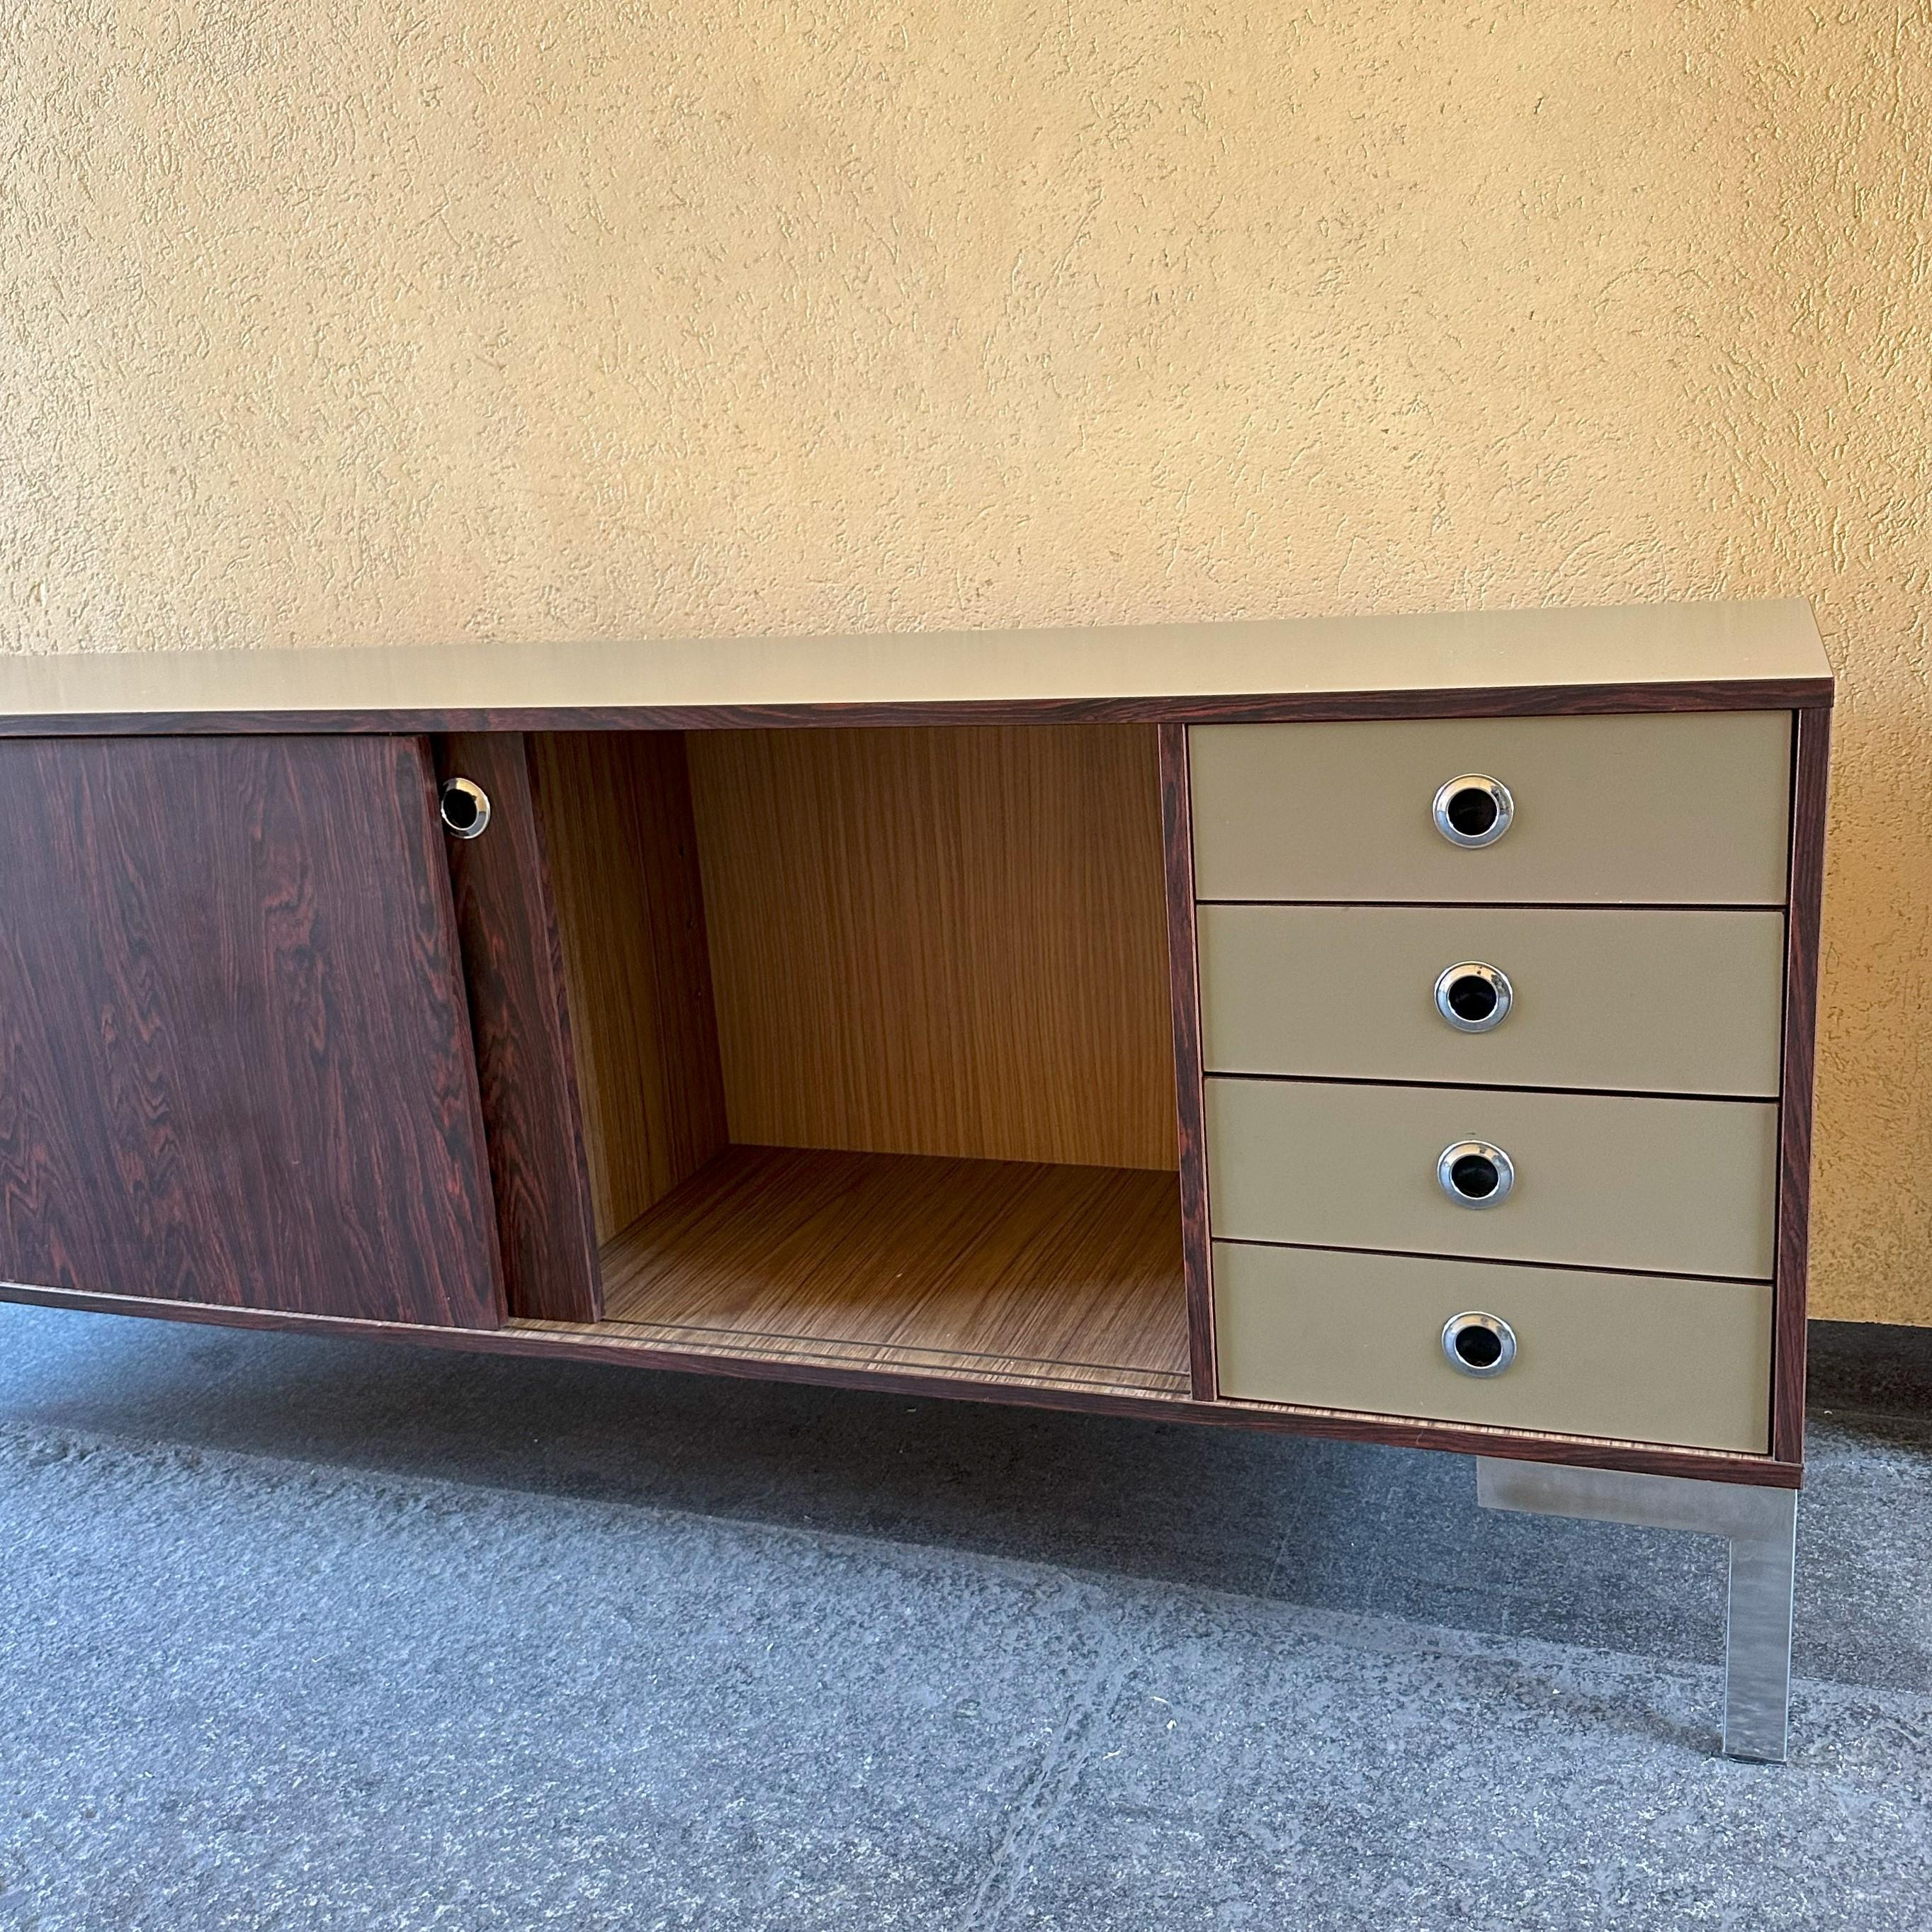 Midcentury-Modern Sideboard in Laminate '70 , Italian Manufacture  For Sale 3